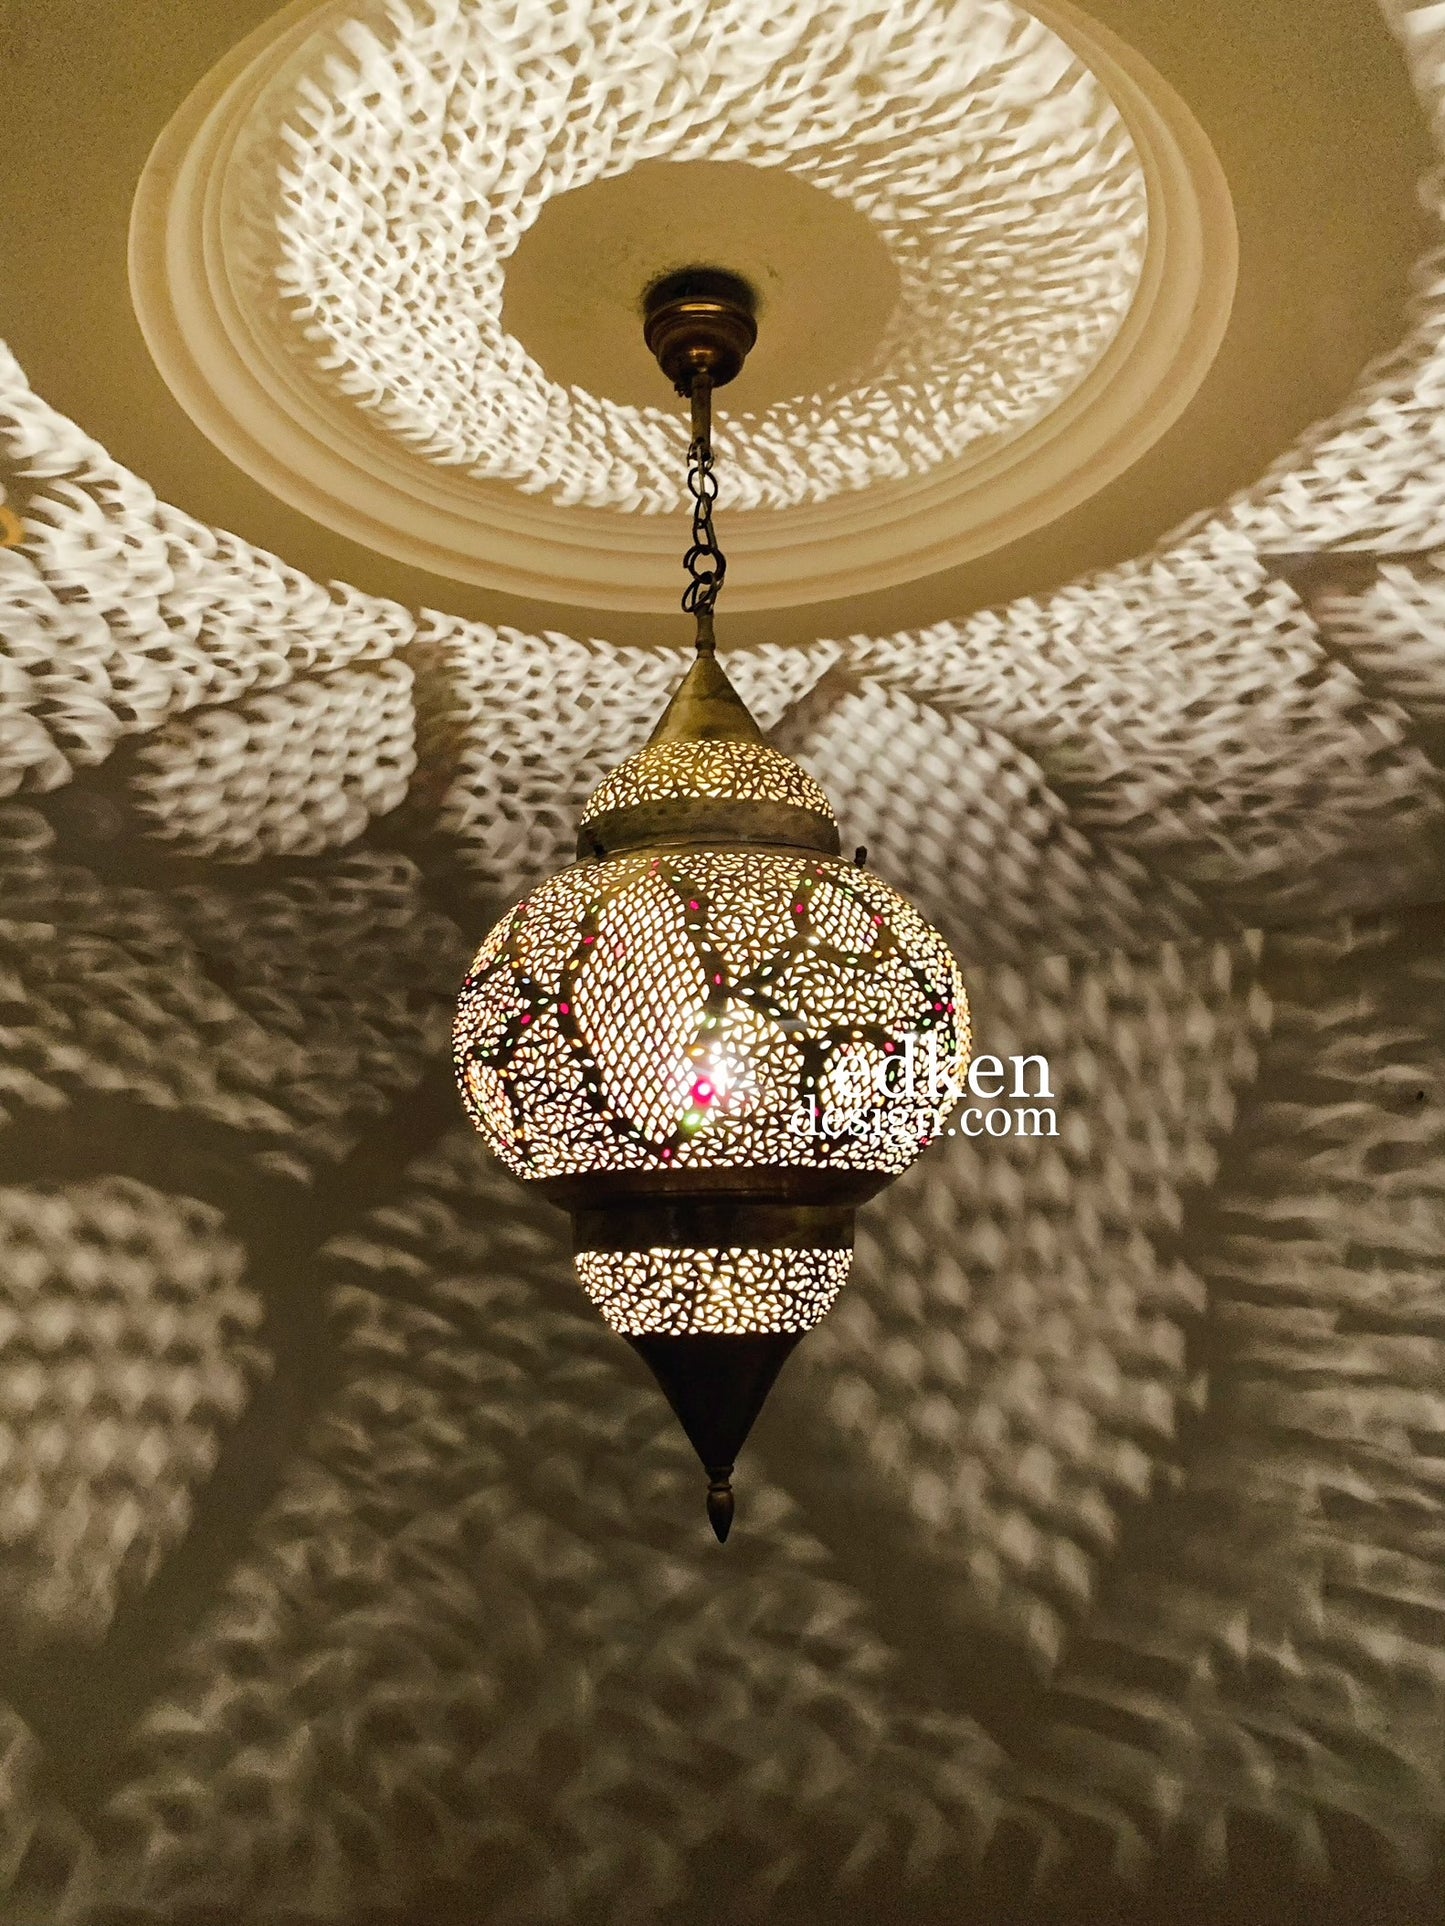 EDKEN LIGHTS - Morocco Ceiling Lamp Shades Fixture  brass Morocco Chandelier Handmade with Red Green and Blue design